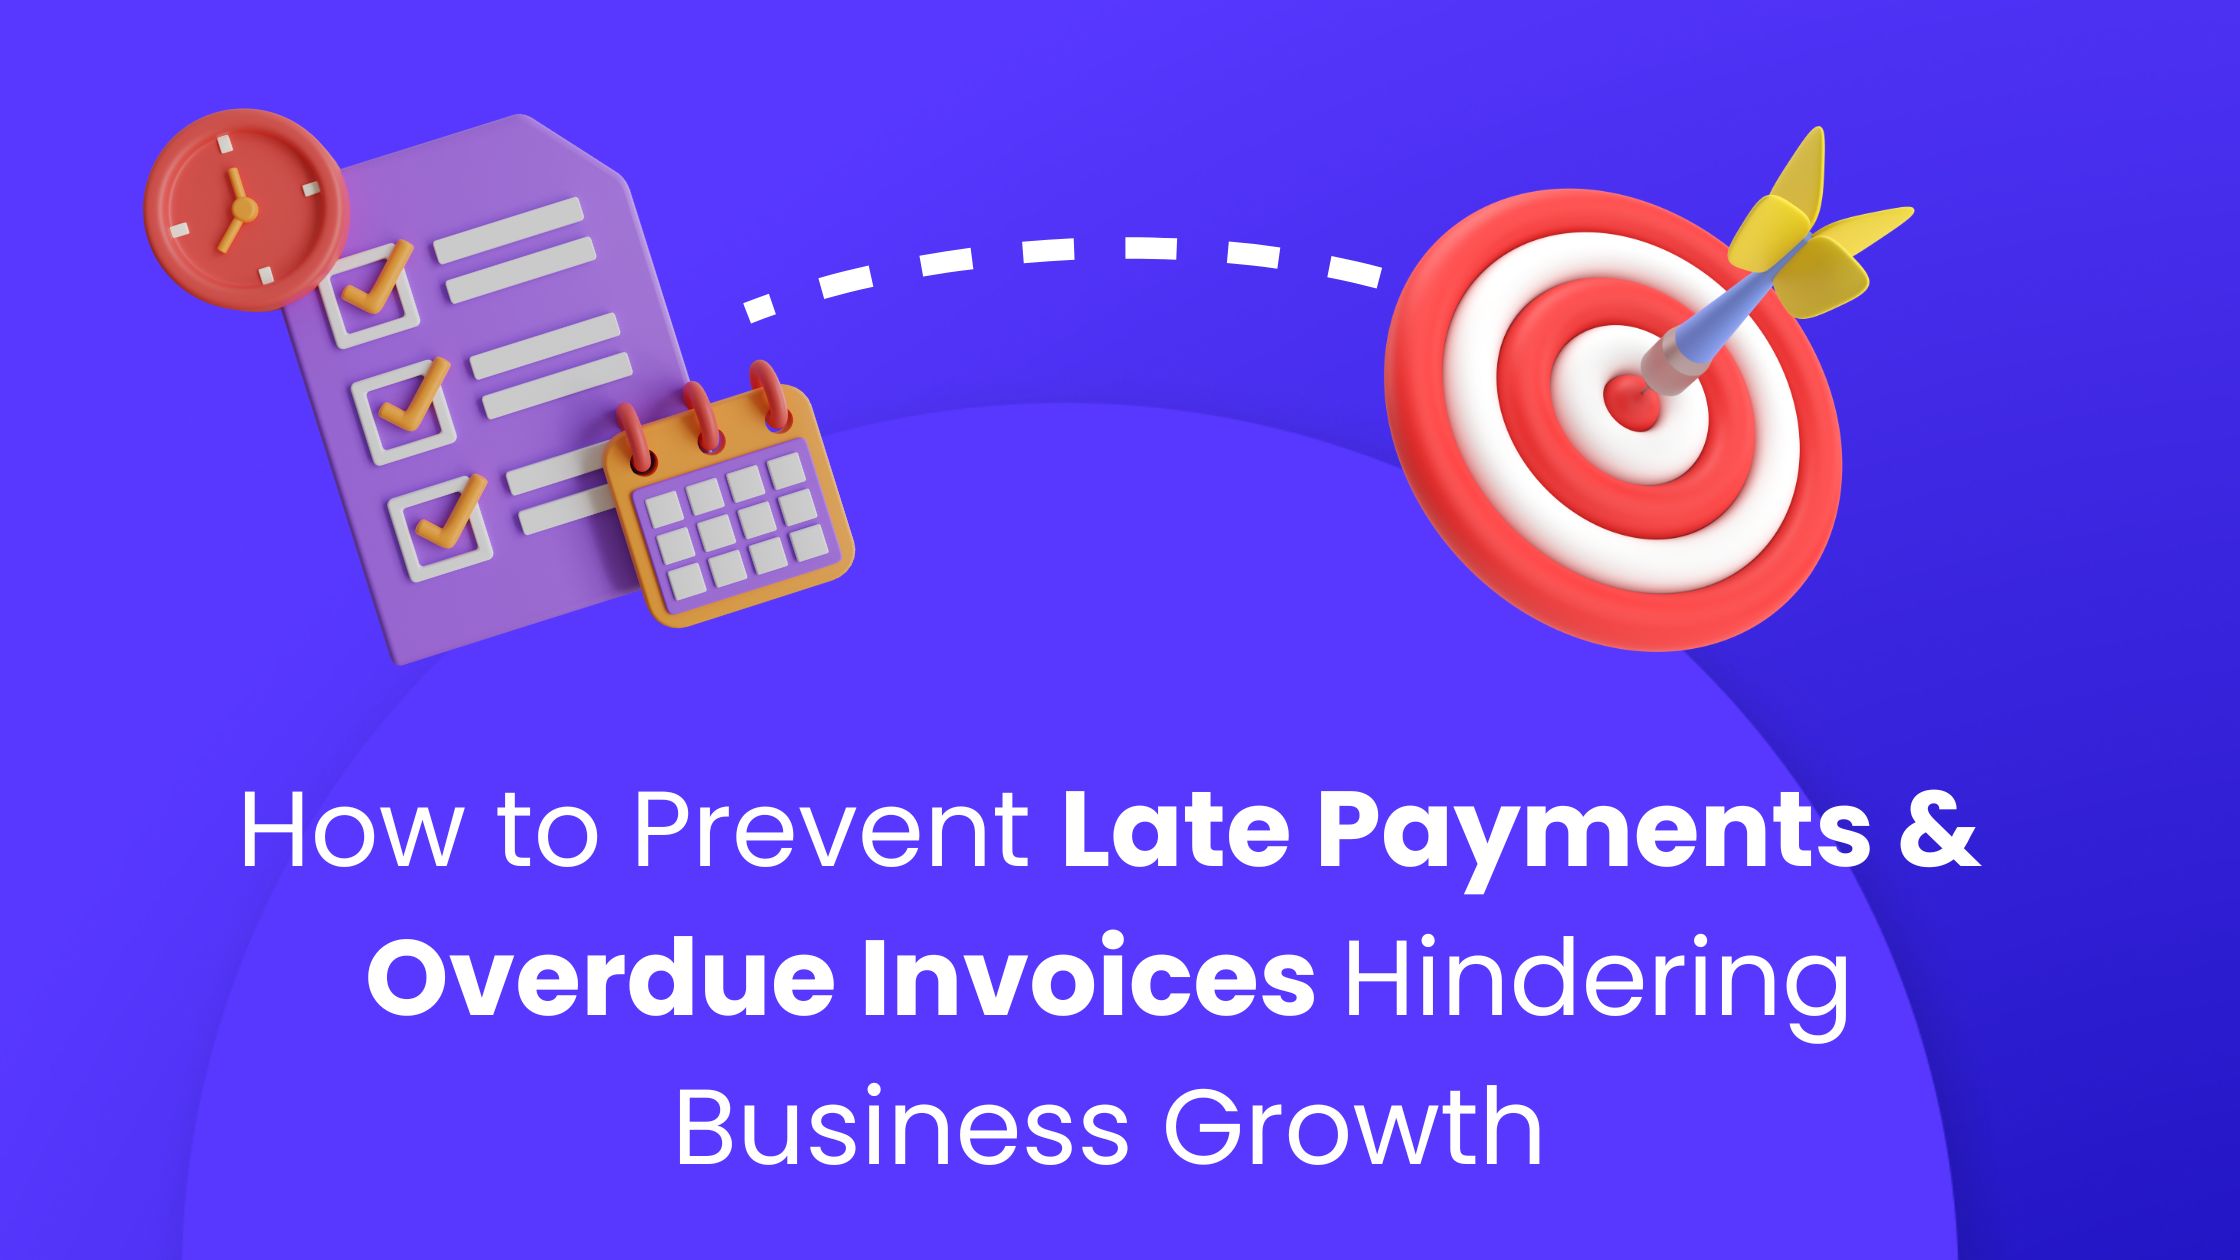 Prevent Late Payments and Overdue Invoices with Hydr - Blog